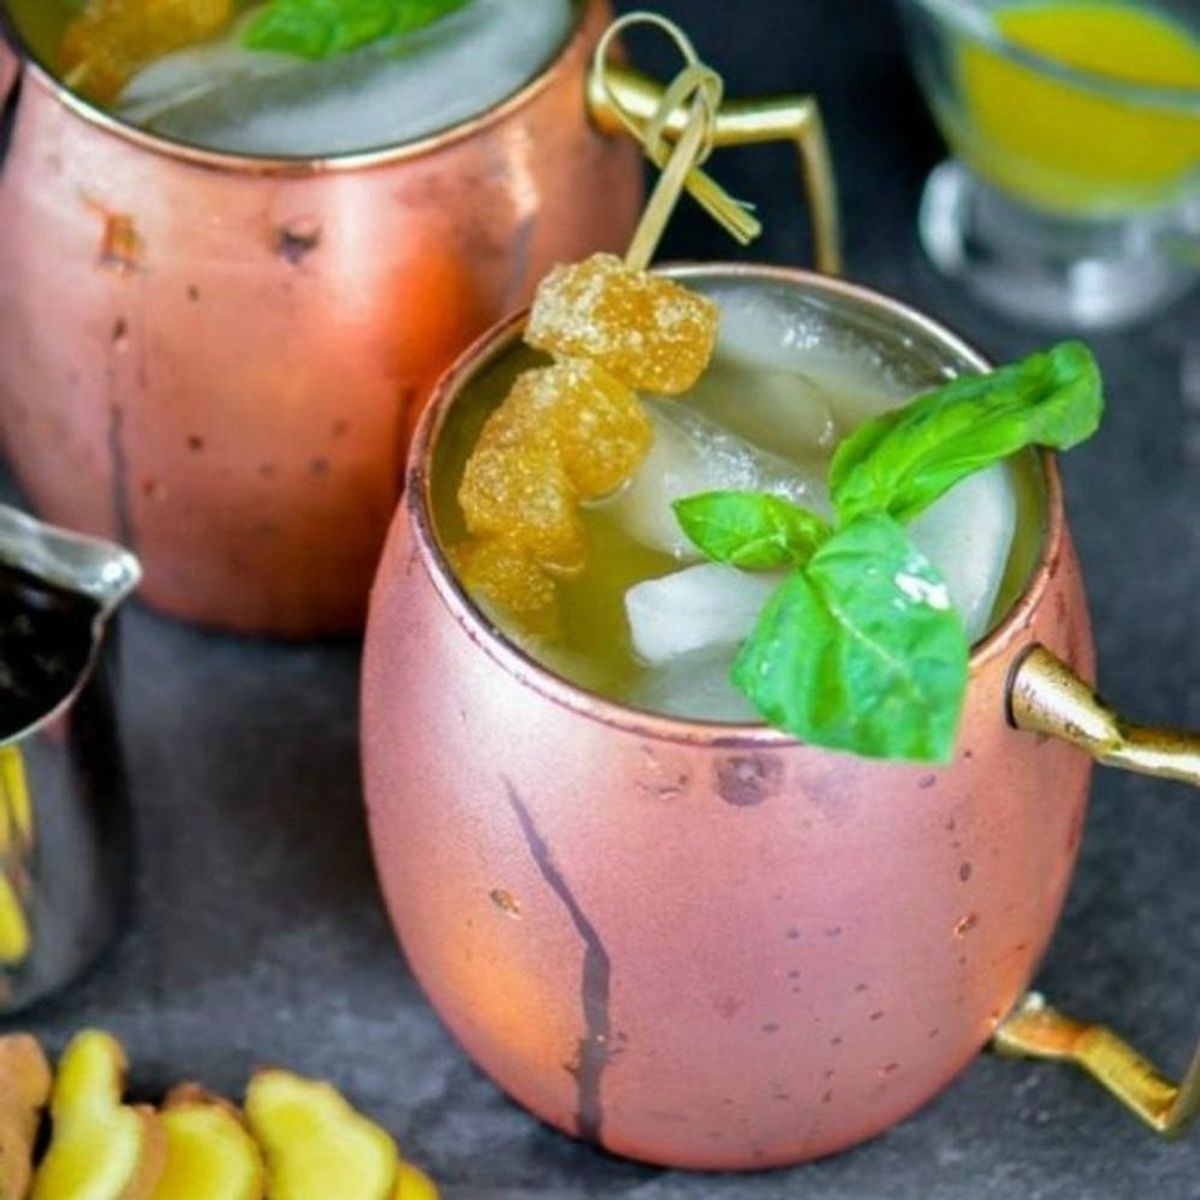 Enter Chill Mode With These 16 Fizzy + Boozy Ginger Ale Cocktails